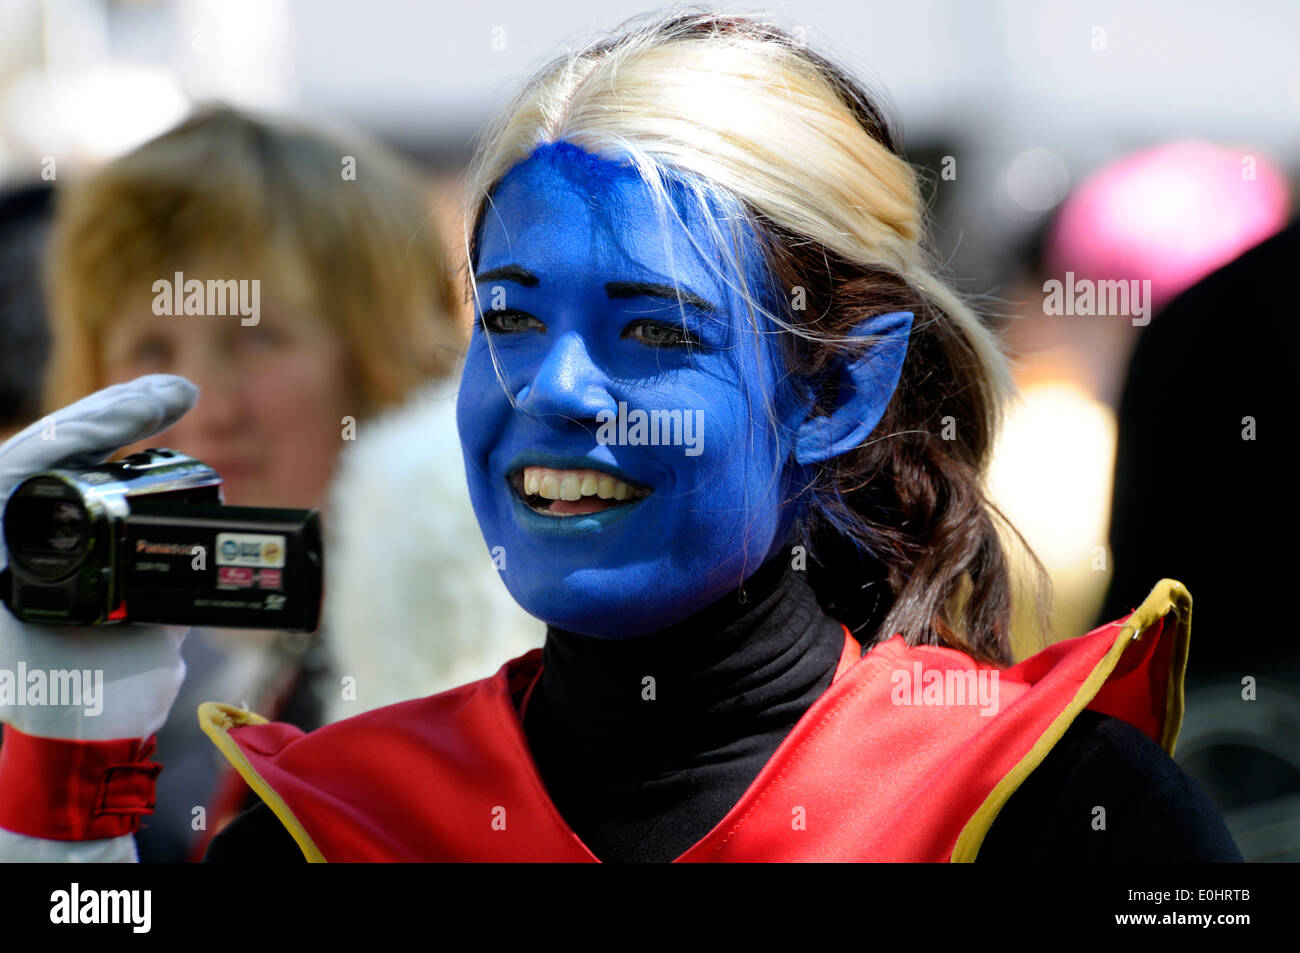 X-Men cosplay Event am Leicester Square in London, 2104. Frau in Tracht mit camcorder Stockfoto